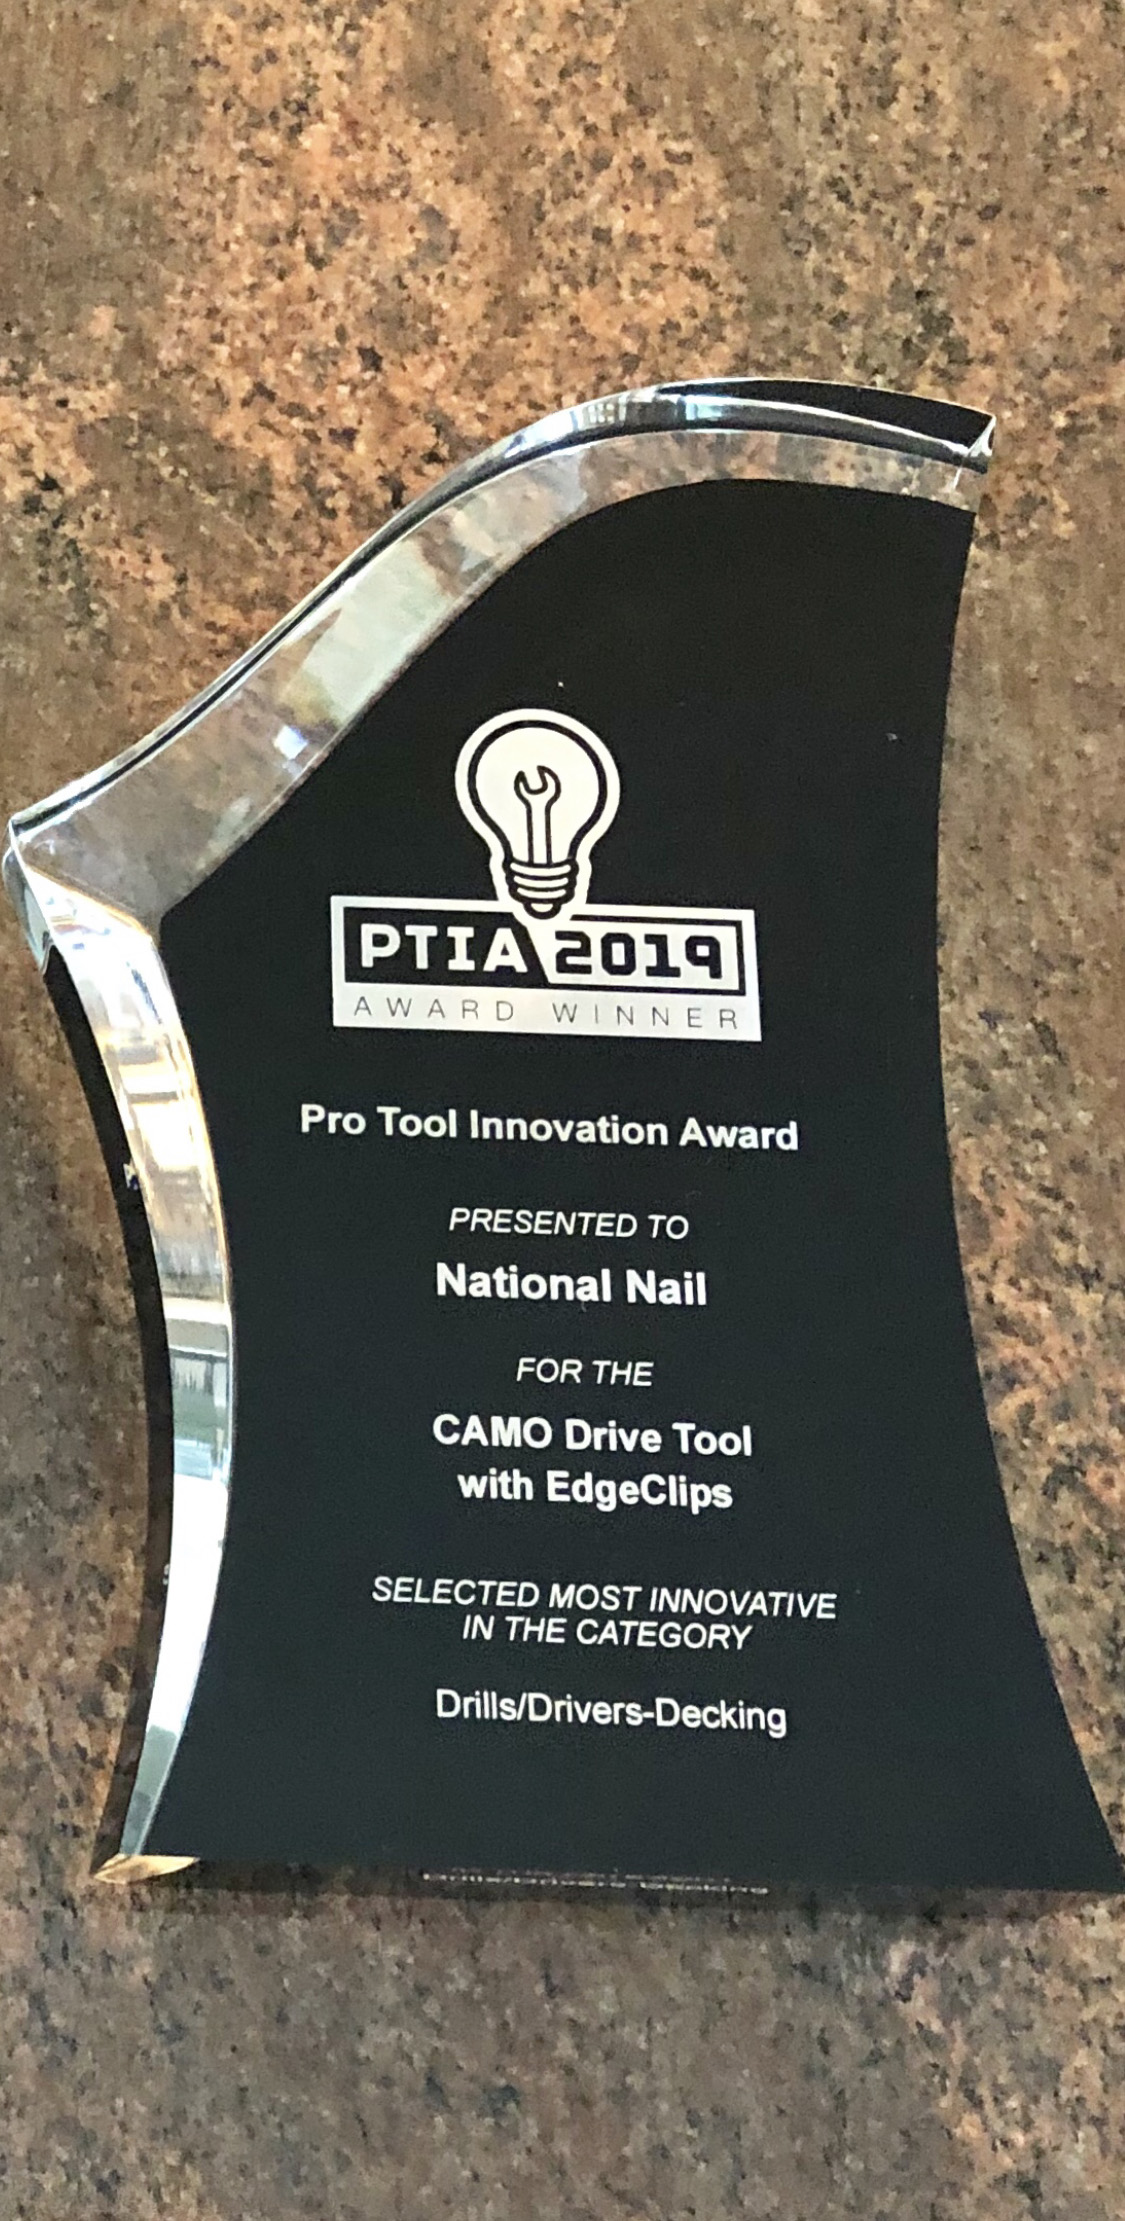 CAMO DRIVE and EdgeClips are winners of the Pro Tool Innovation Award